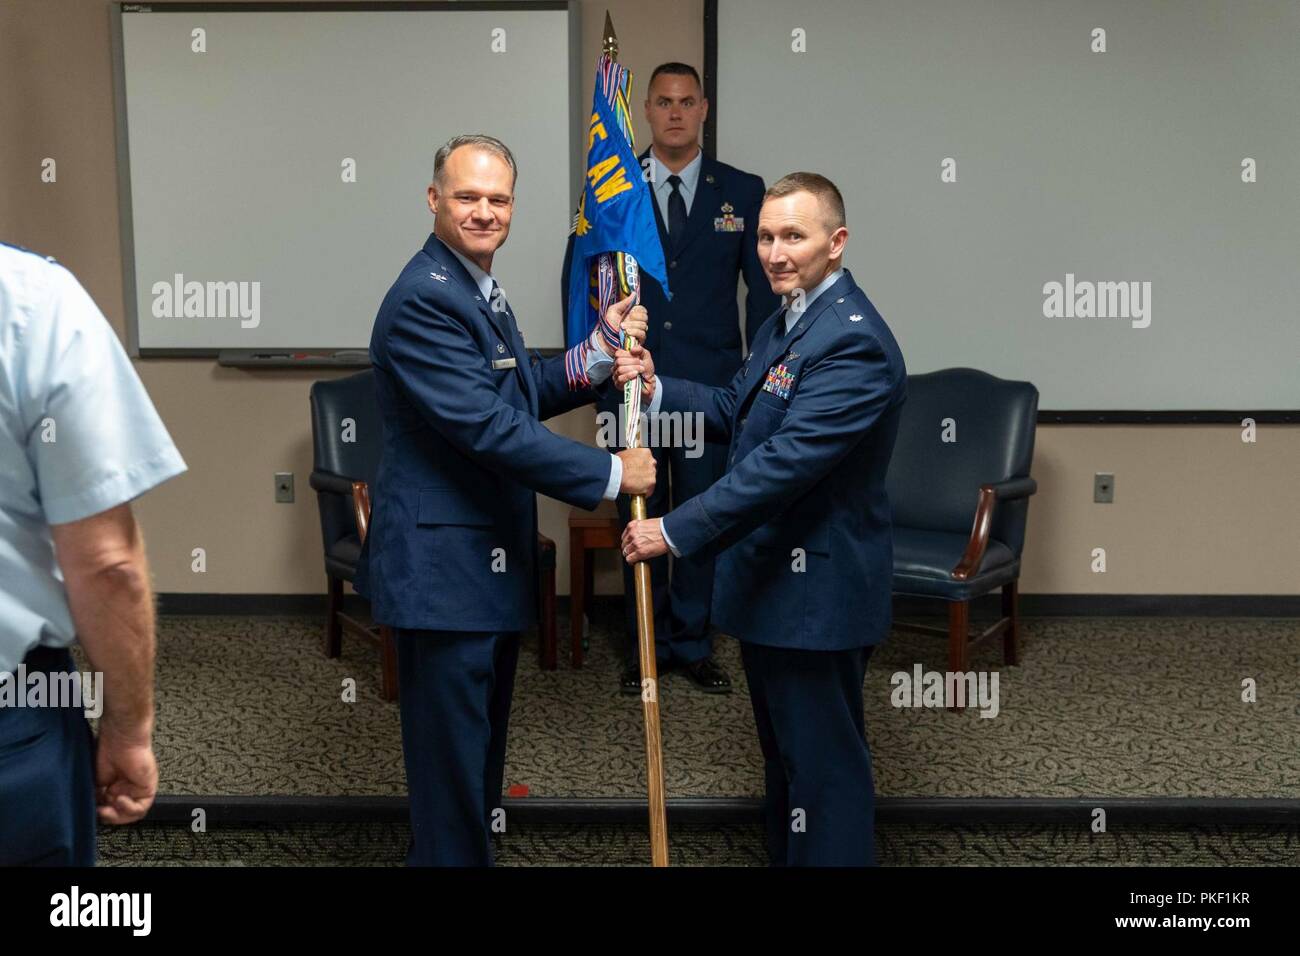 Lt. Col. David Bailey (right) accepts the 315th Aerospace Evacuation Squadron guidon from 315th Operations Group Commander Col. Stephen Lanier (left) during the 315th AES assumption of command ceremony Aug. 5, 2018, at the Yonkie Auditorium at Joint Base Charleston, S.C. Bailey assumed command of the squadron after his tenure as interim commander. Stock Photo